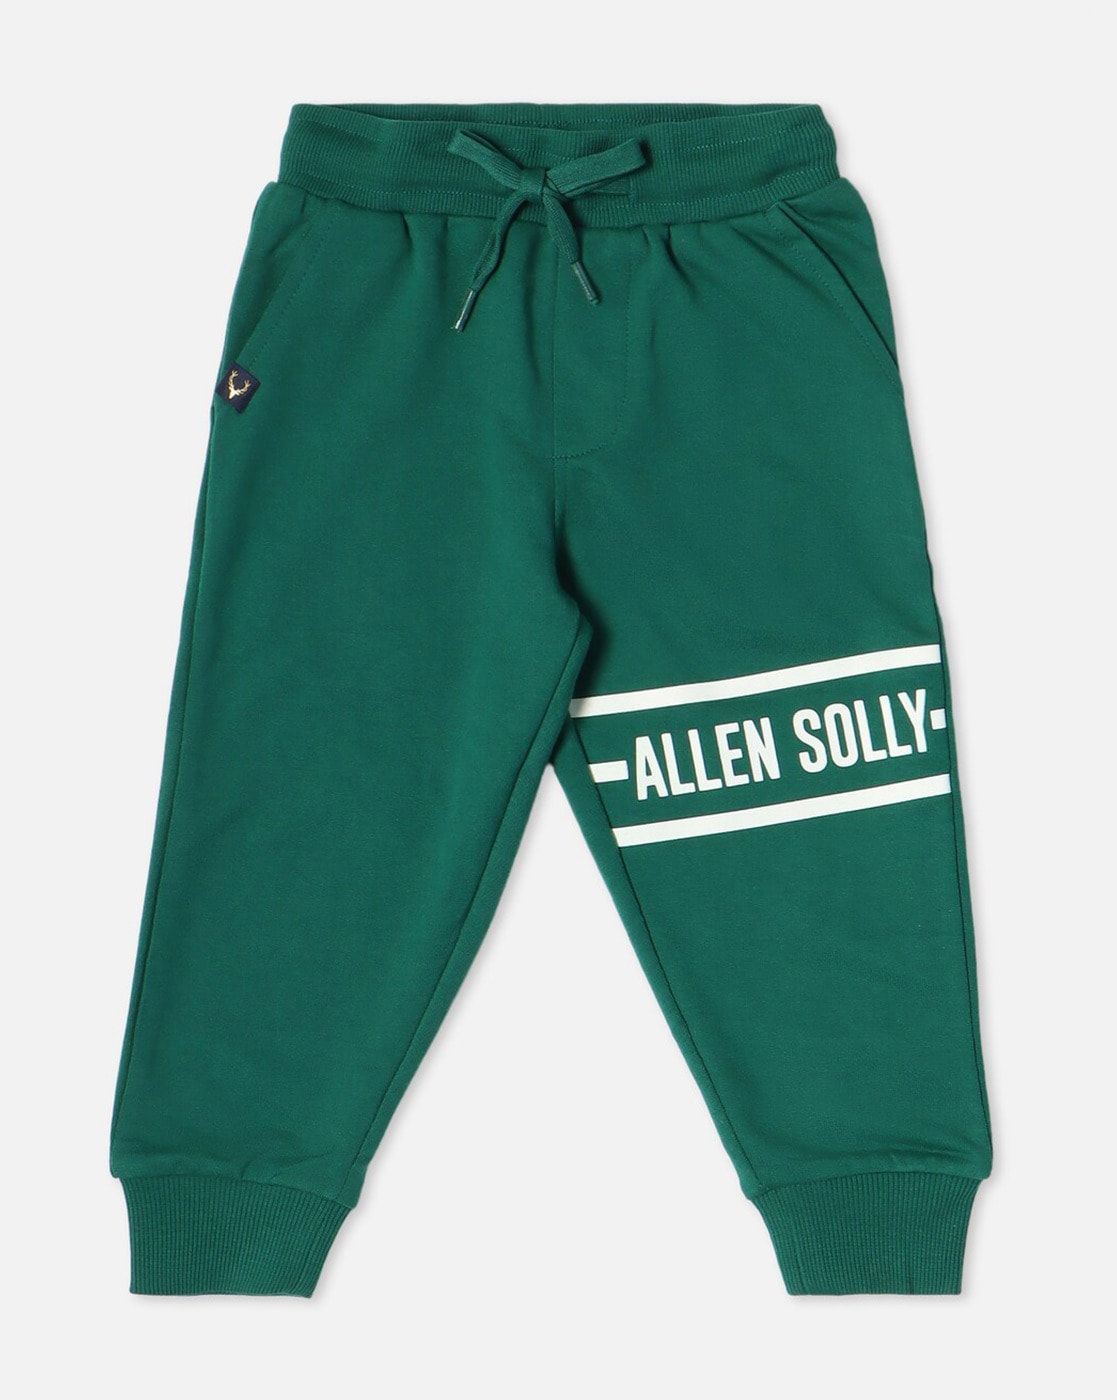 Buy ALLEN SOLLY Black Regular Fit Mid Rise Boys Track Pants | Shoppers Stop